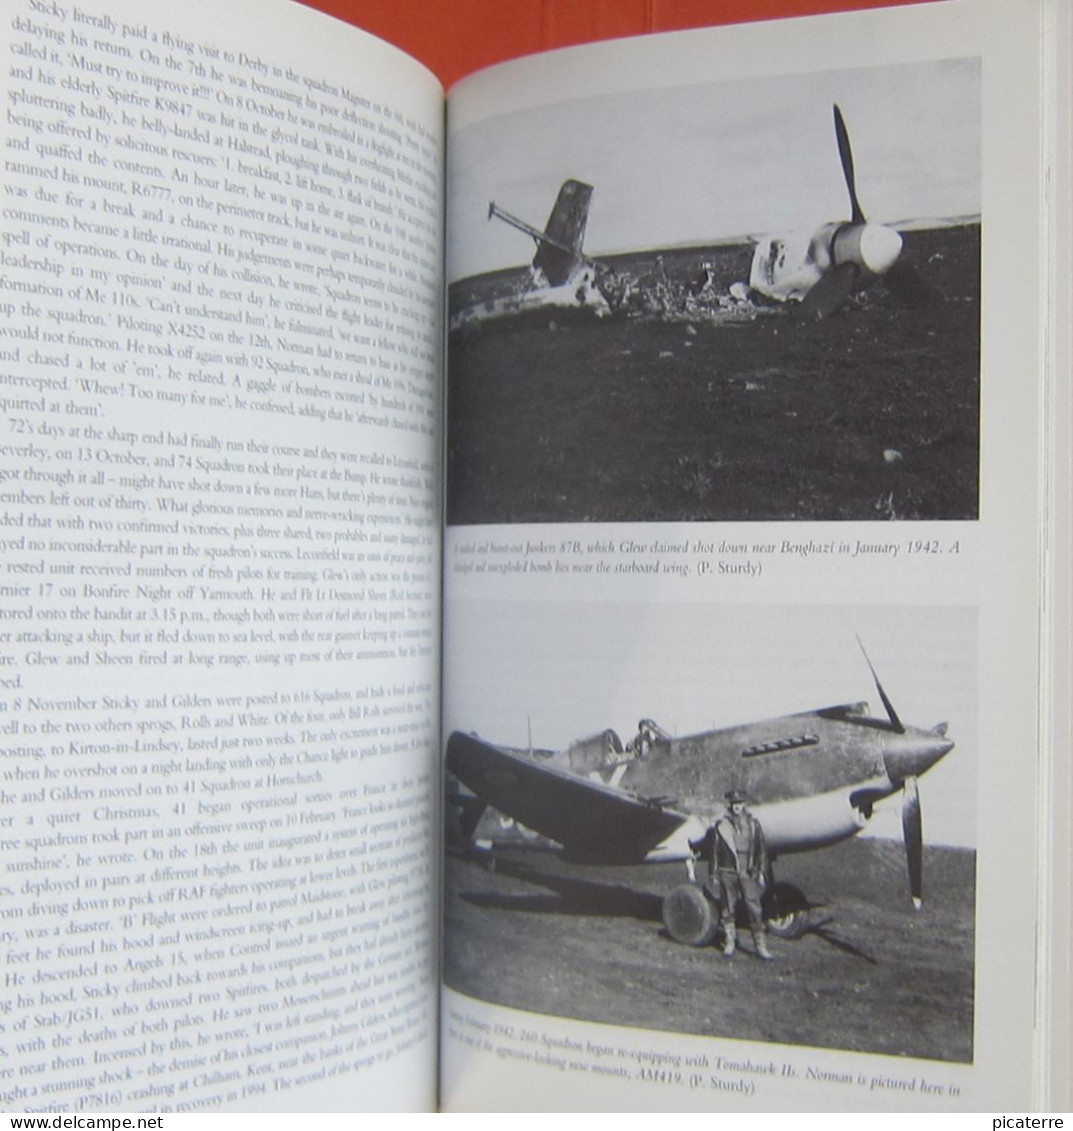 POST FREE UK- MILITARIA-DERBYSHIRE FIGHTER ACES Of World War 2- Barry M.Marsden-1st Ed As NEW-see 6scans - Weltkrieg 1939-45